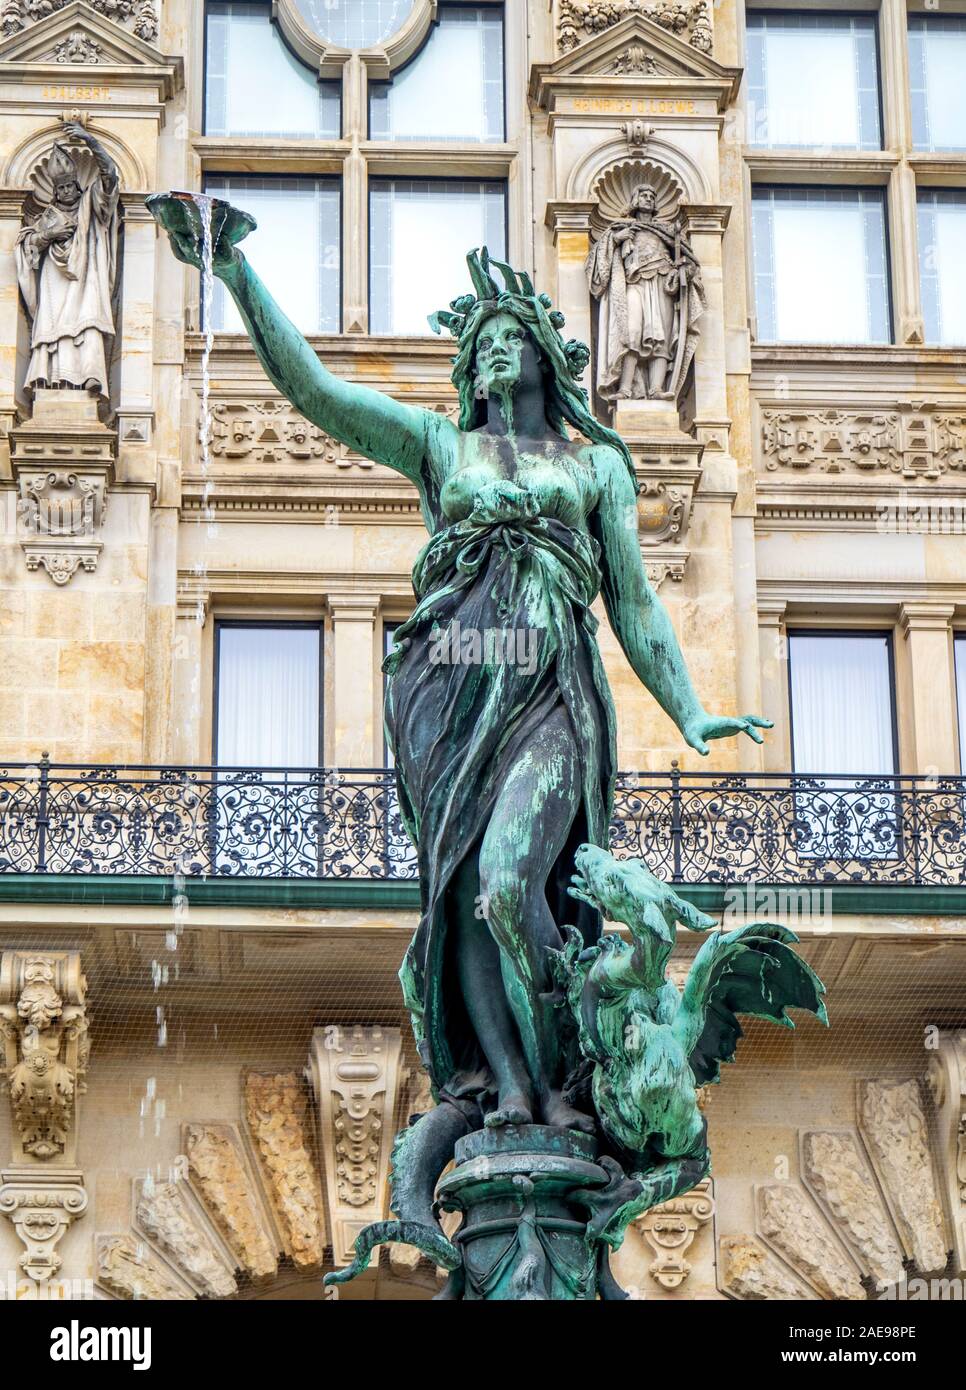 Bronze sculpture statue Hygieia fountain in the courtyard of Rathaus City Hall Hamburg Germany. Stock Photo